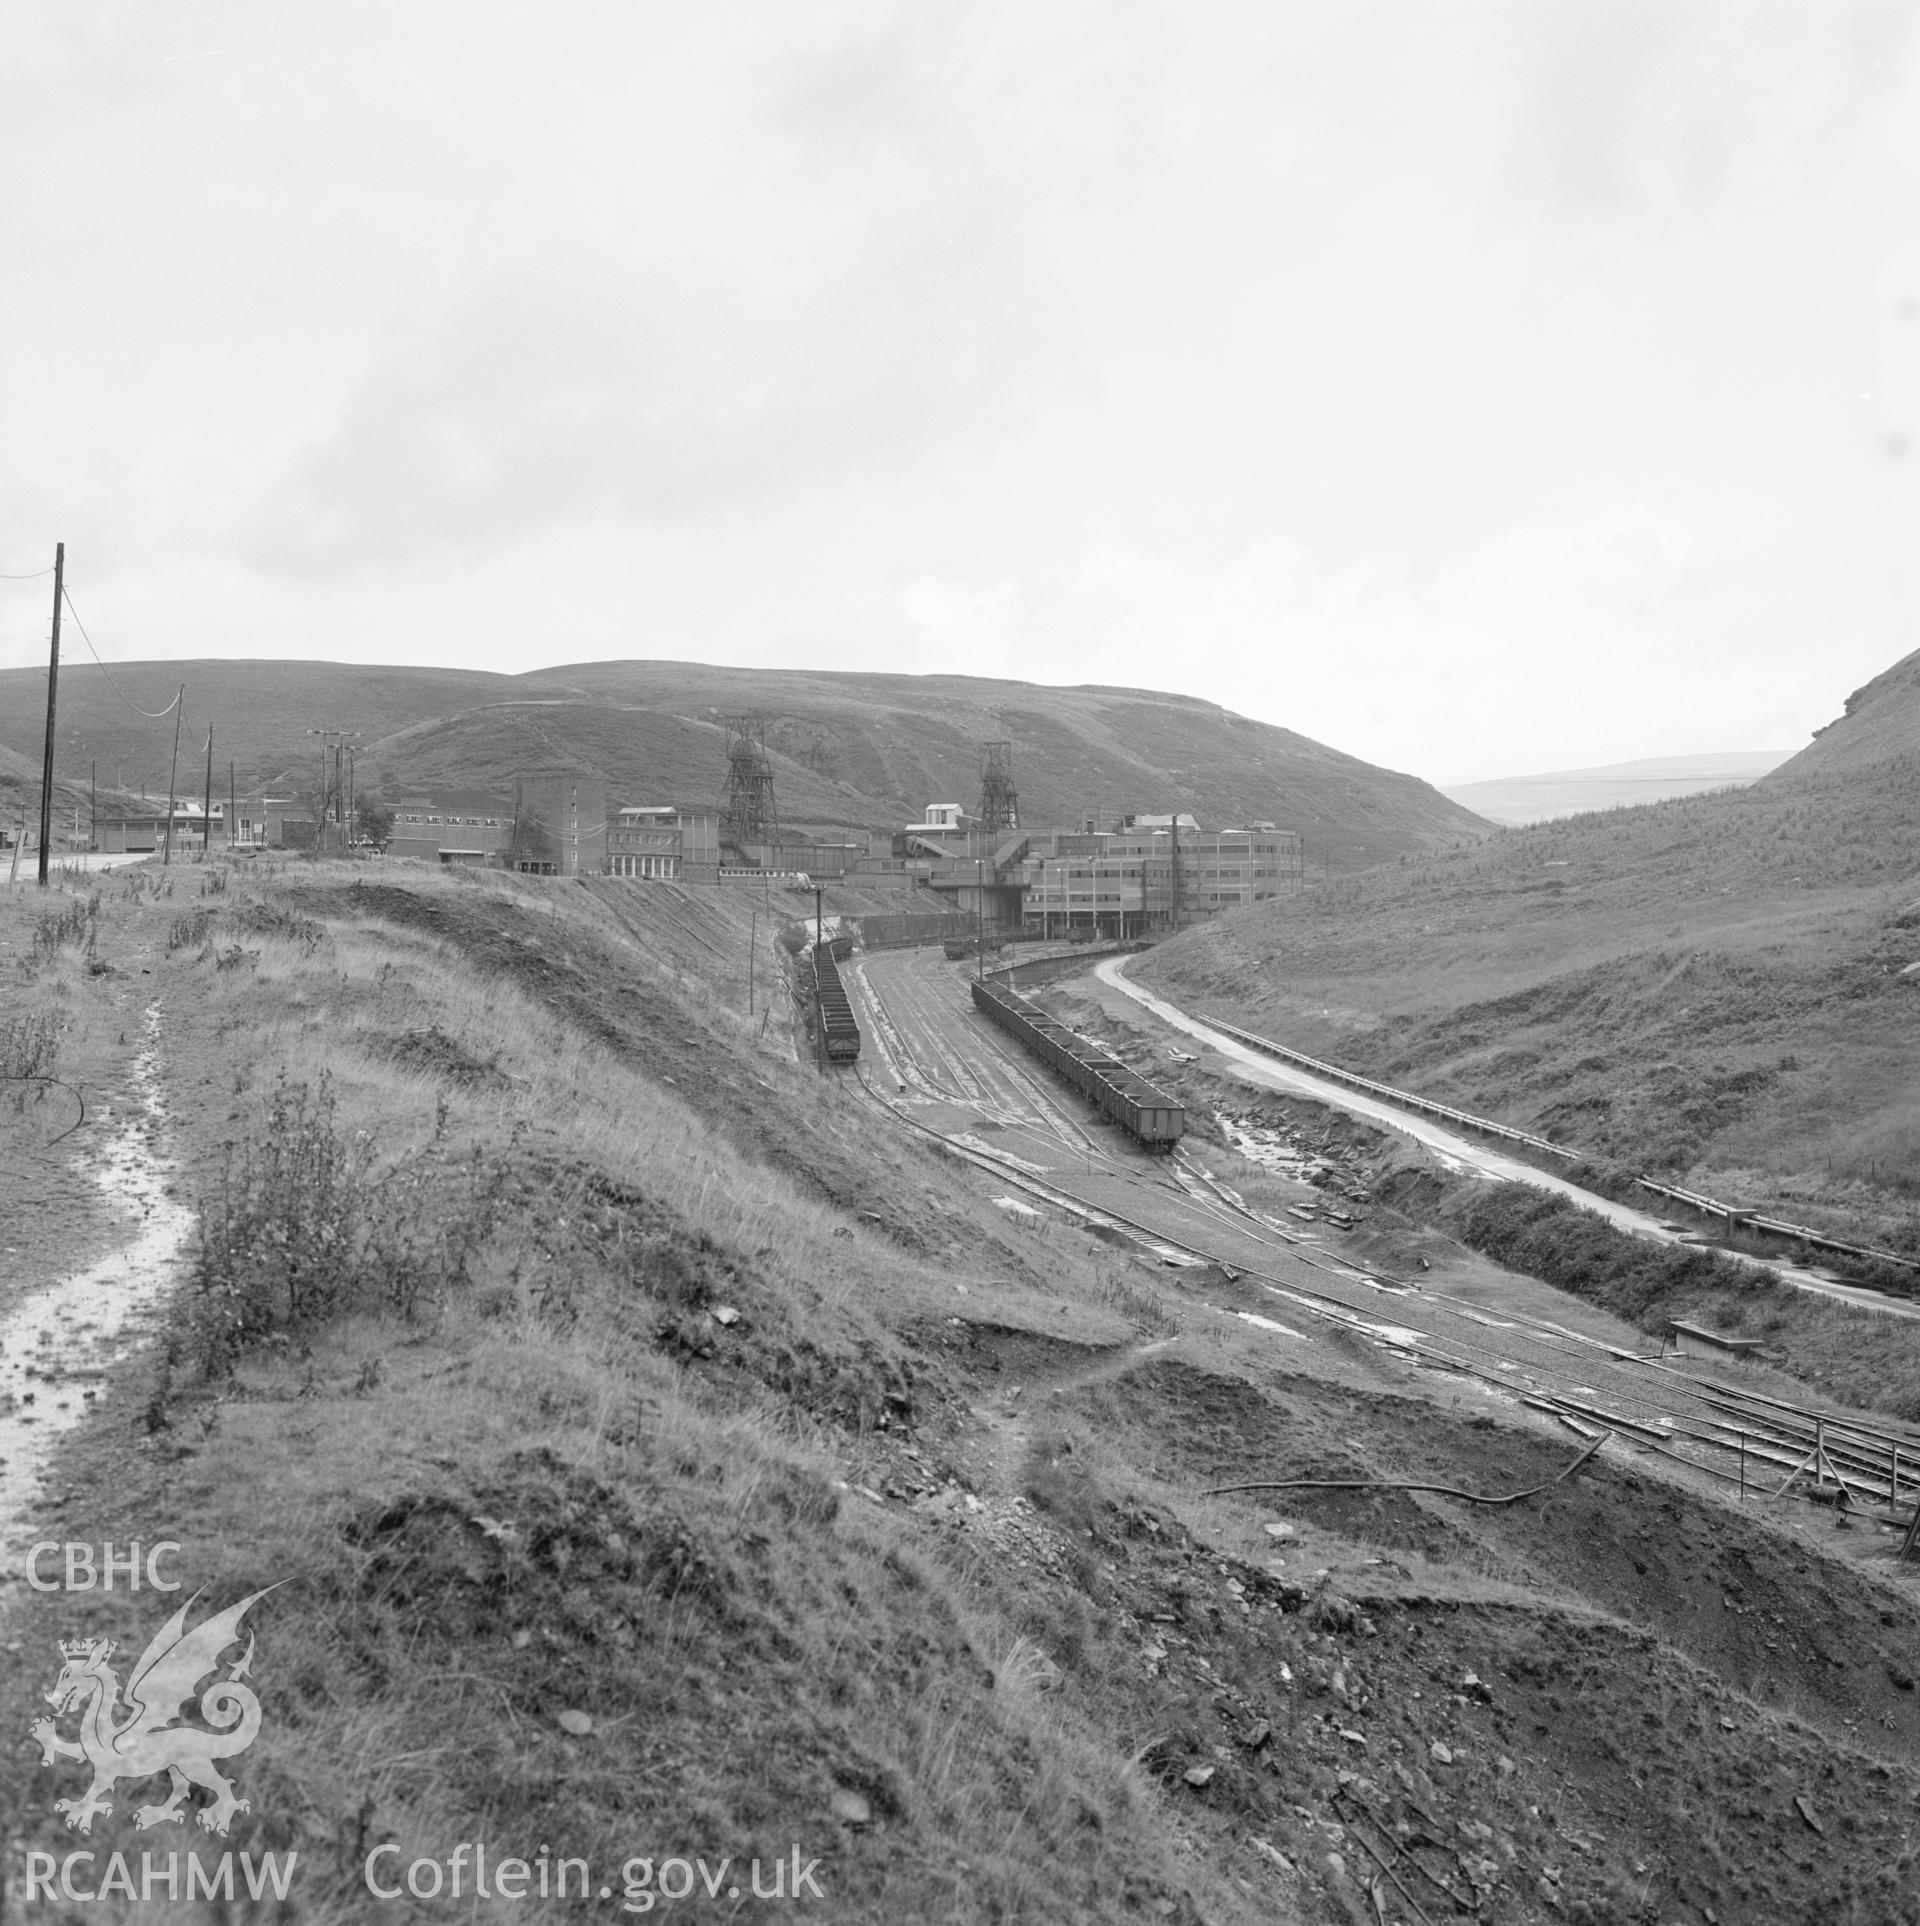 Digital copy of an acetate negative showing general view of Maerdy Colliery, from the John Cornwell Collection.